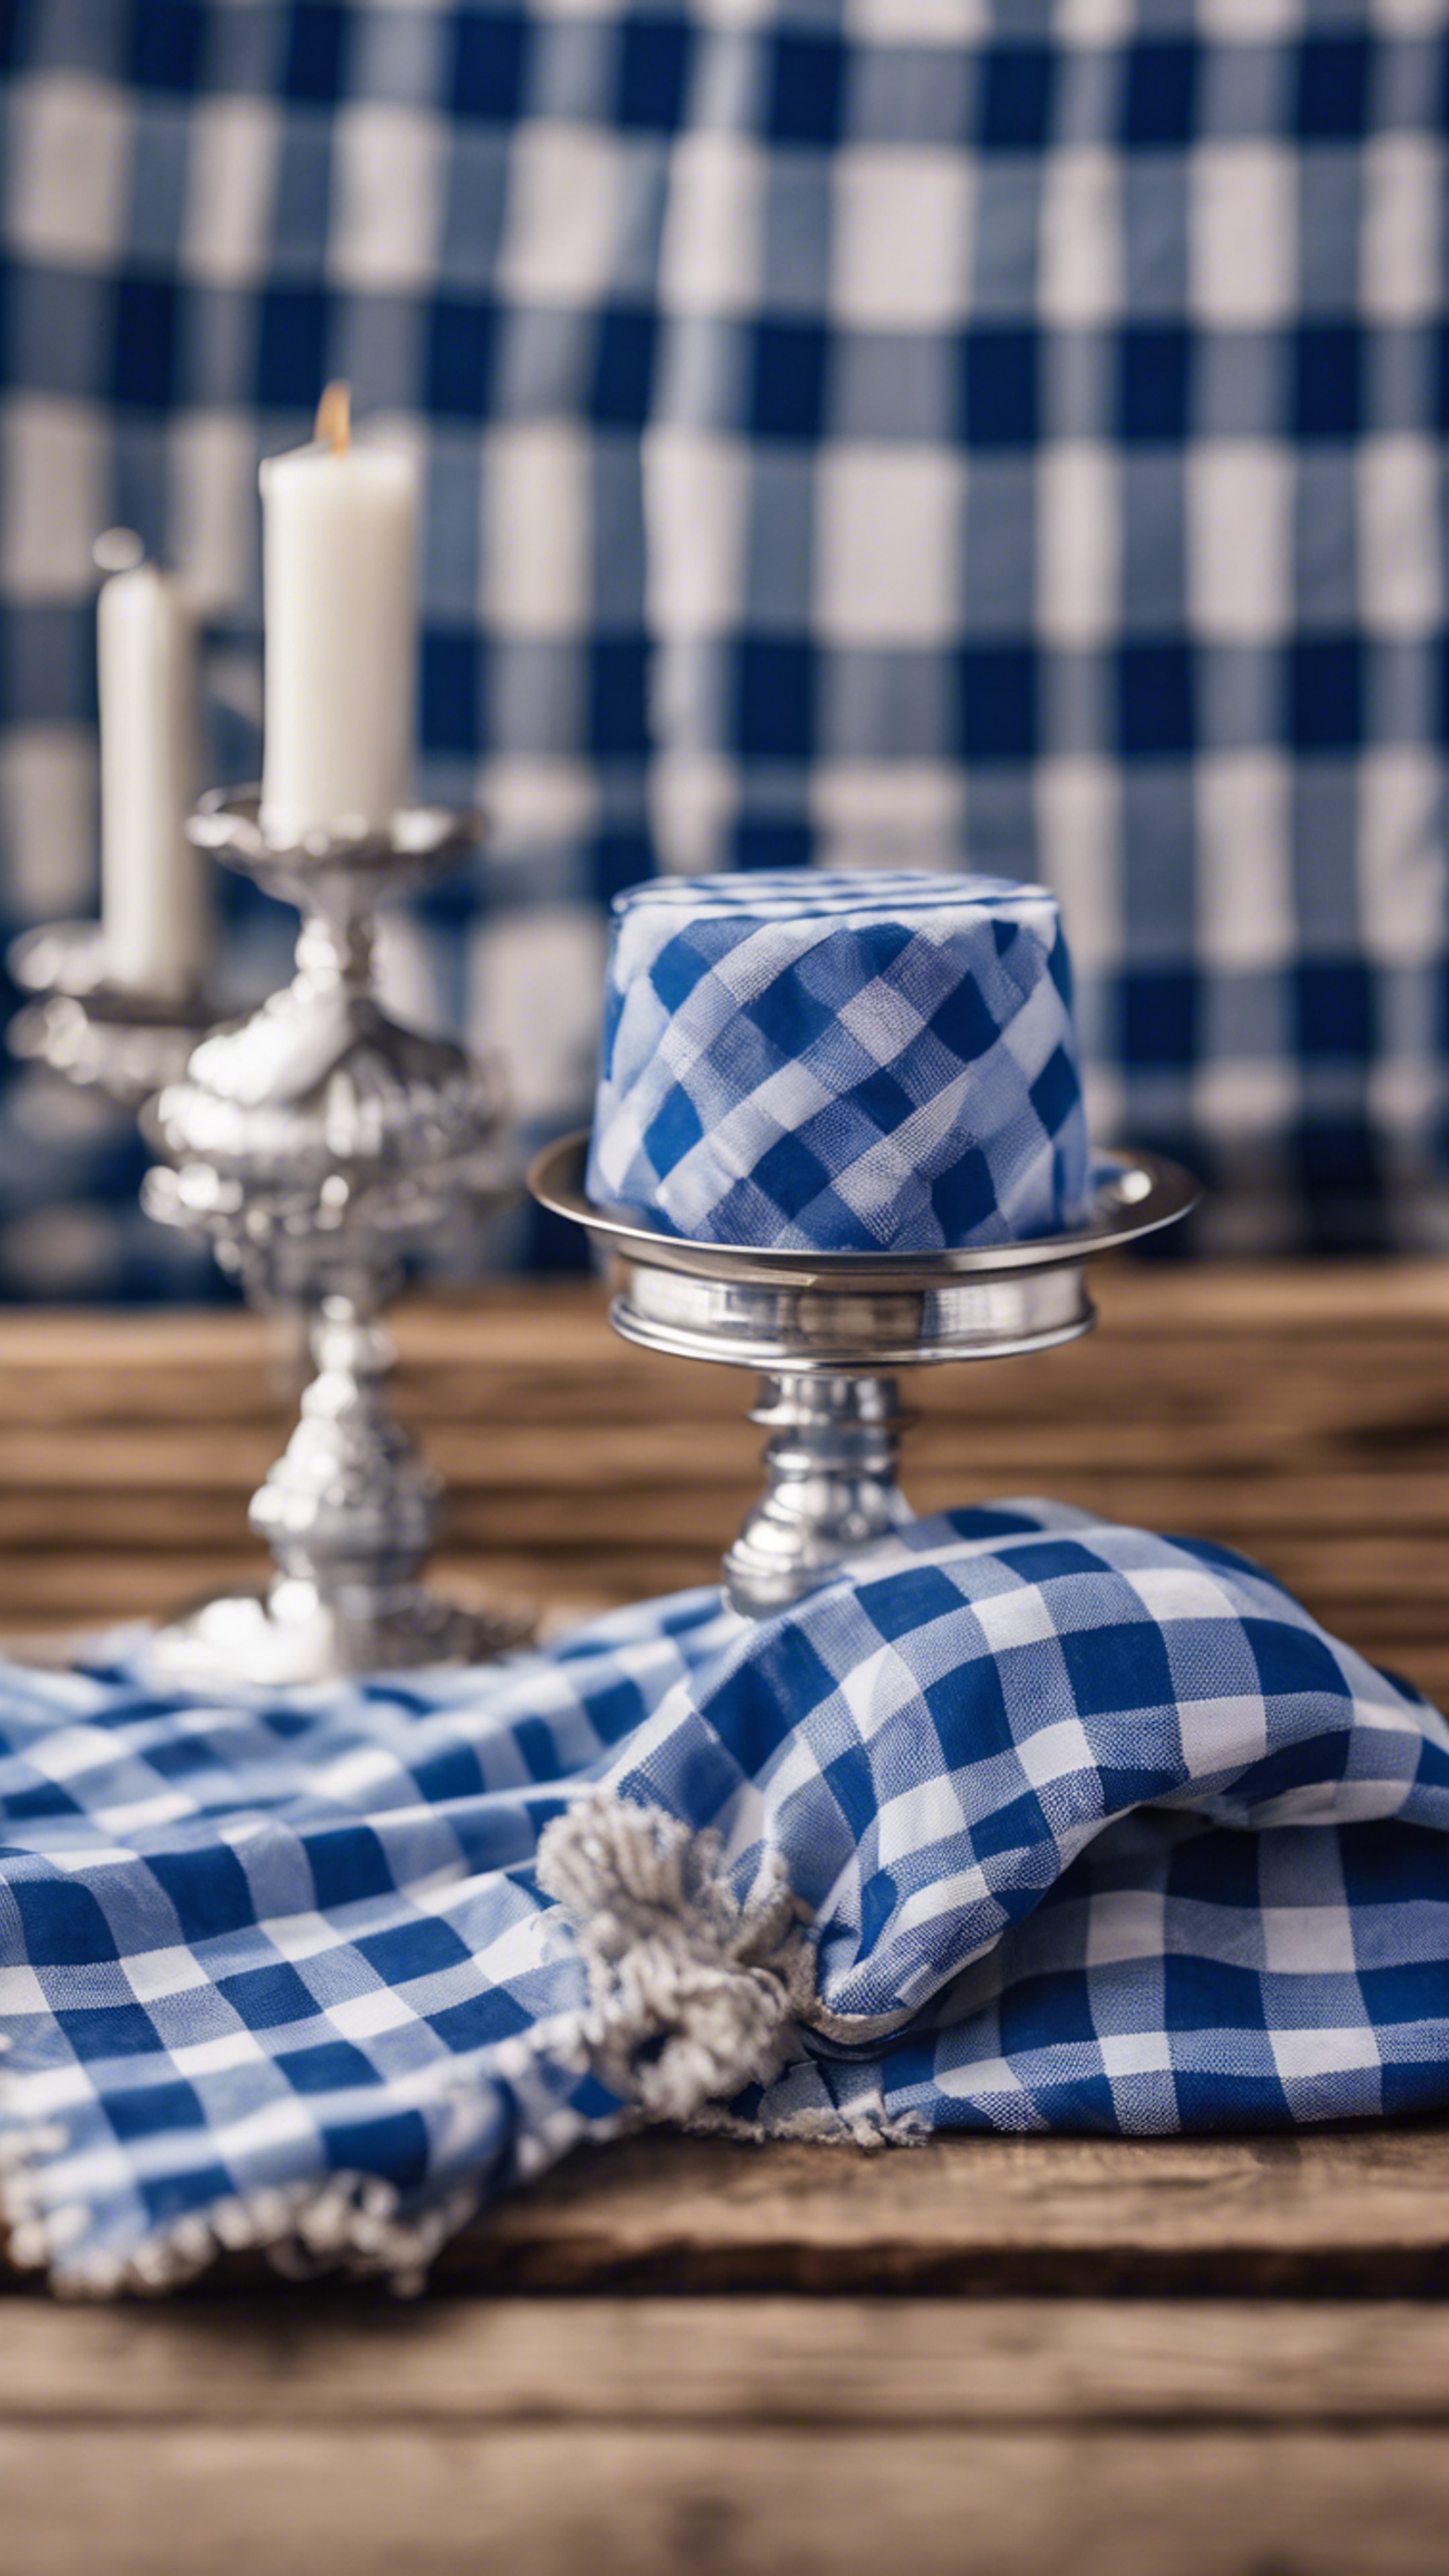 Classic blue checkered gingham fabric draped over a wooden table with a silver candelabra, evoking a preppy picnic scene. 牆紙[5483729deeeb4e2a9f91]